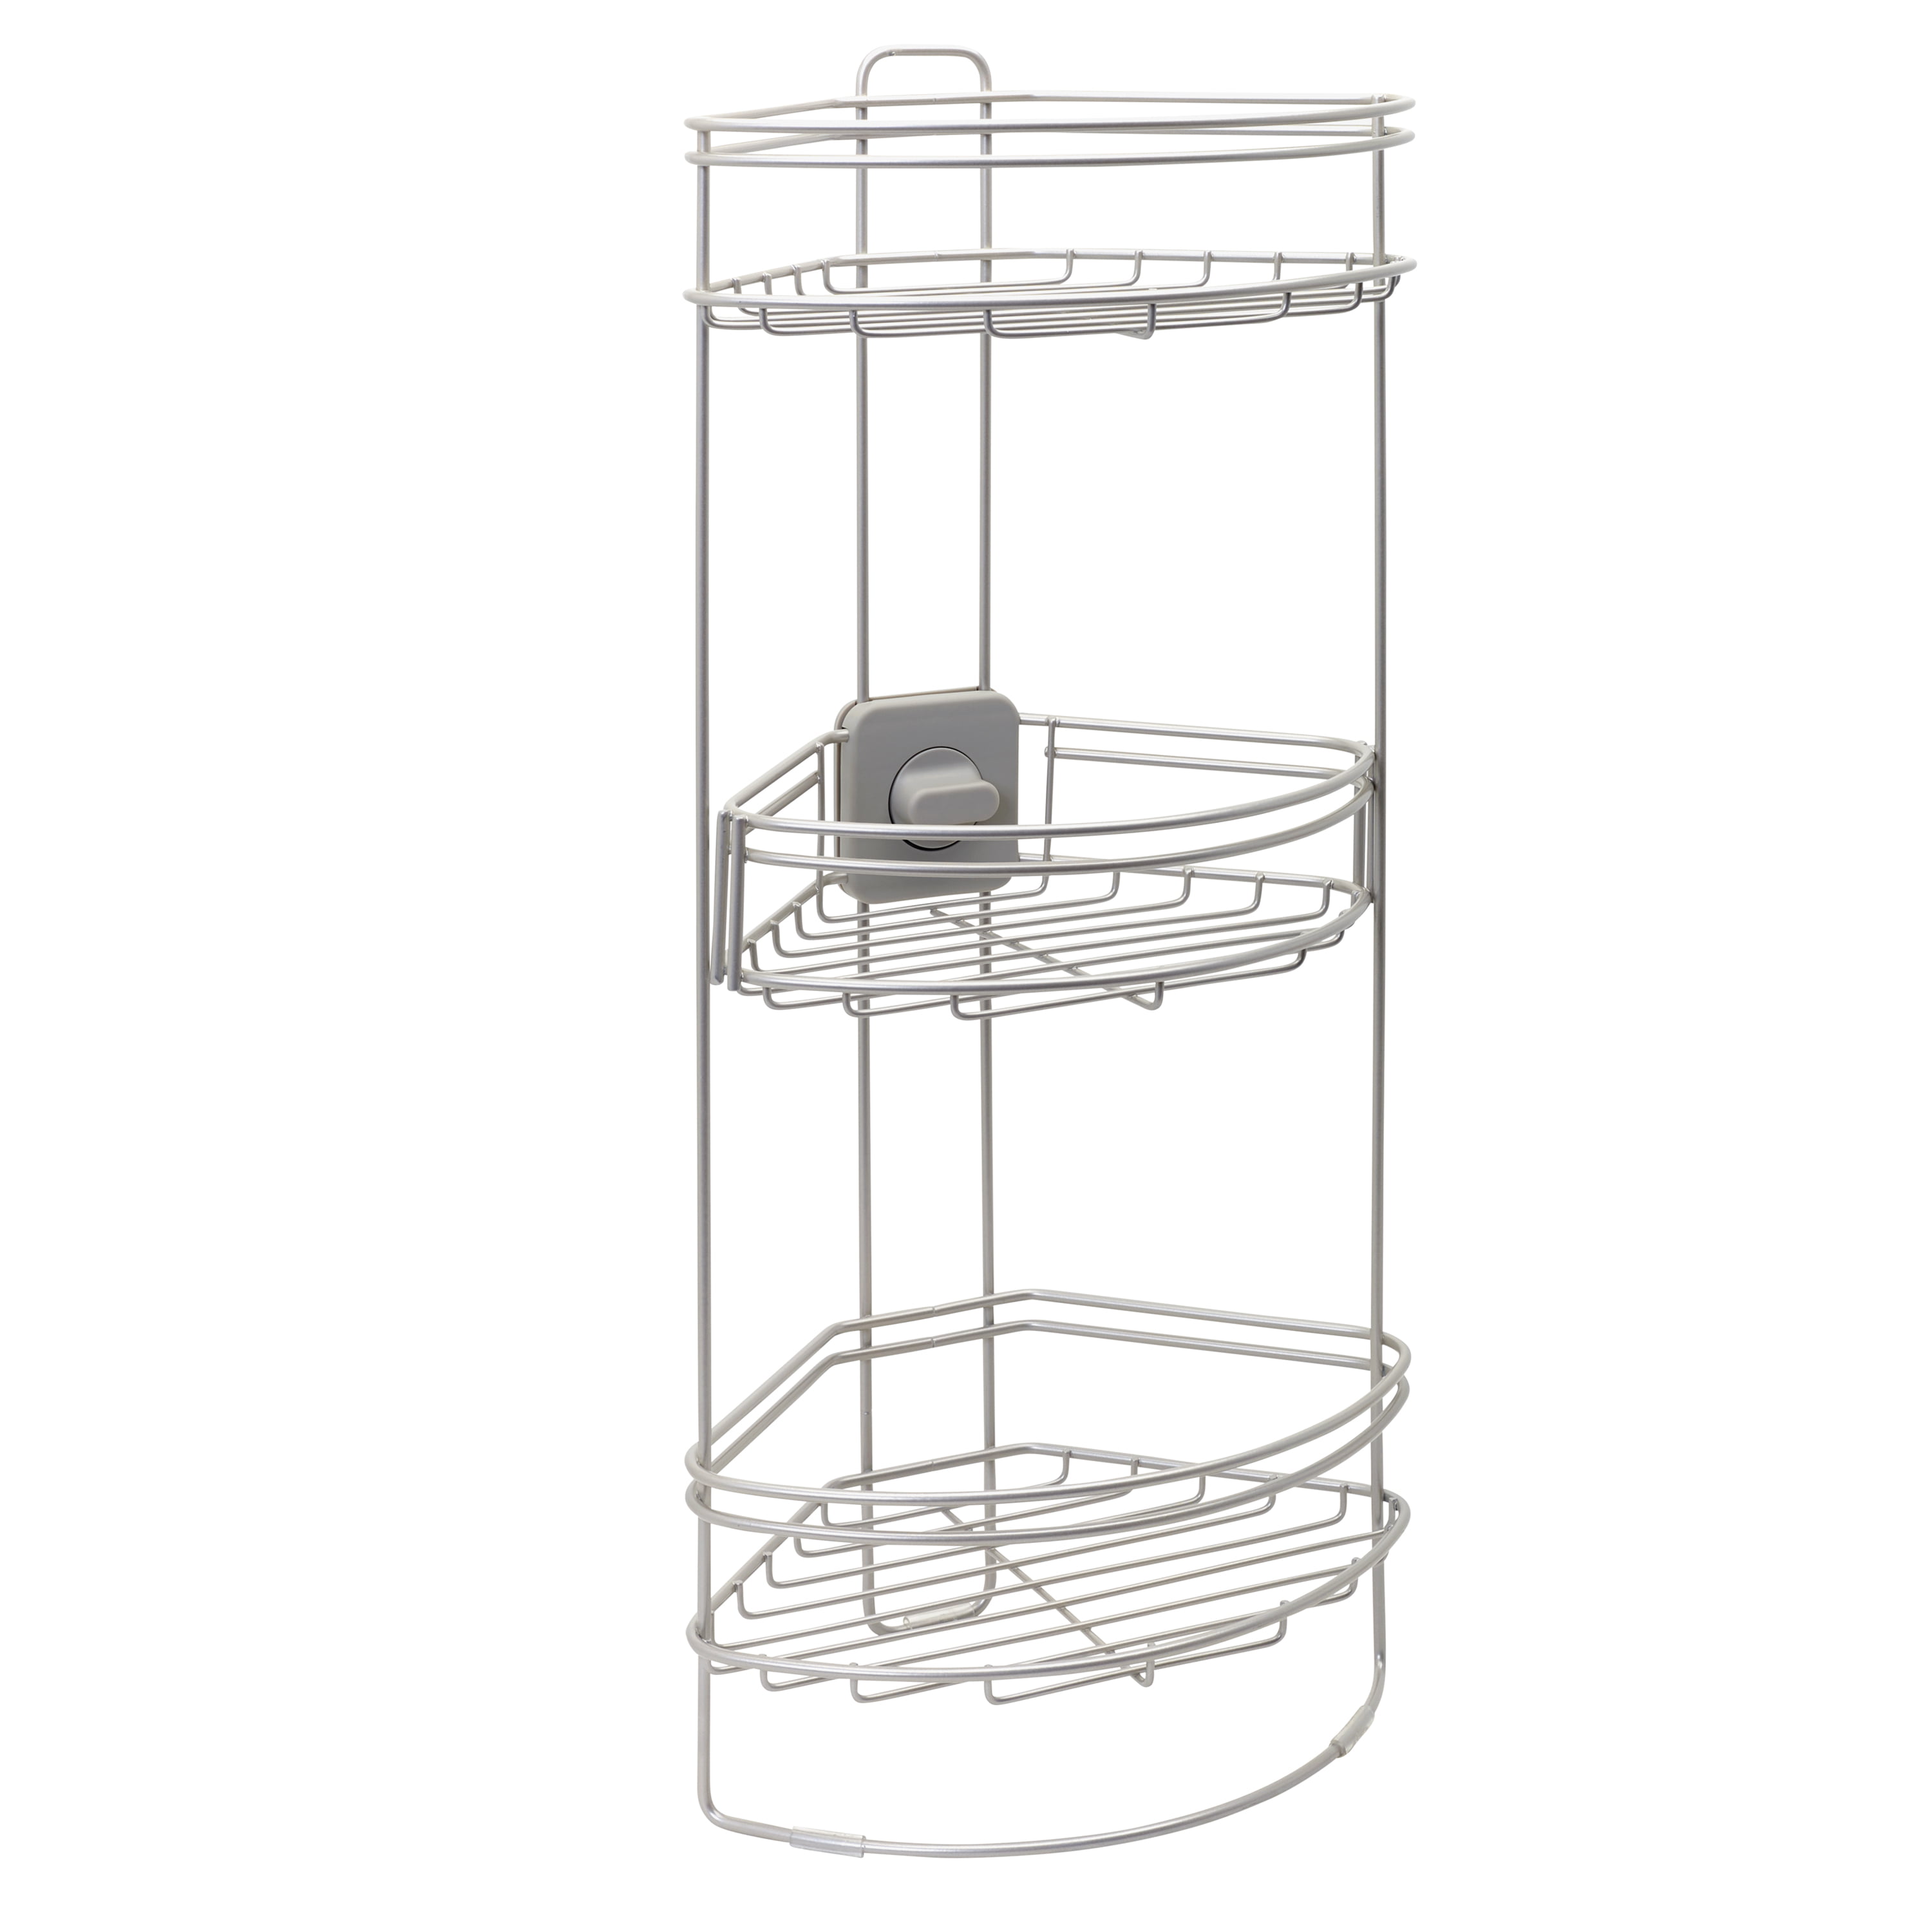 Style Selections Satin Nickel Steel 2-Shelf Hanging Shower Caddy